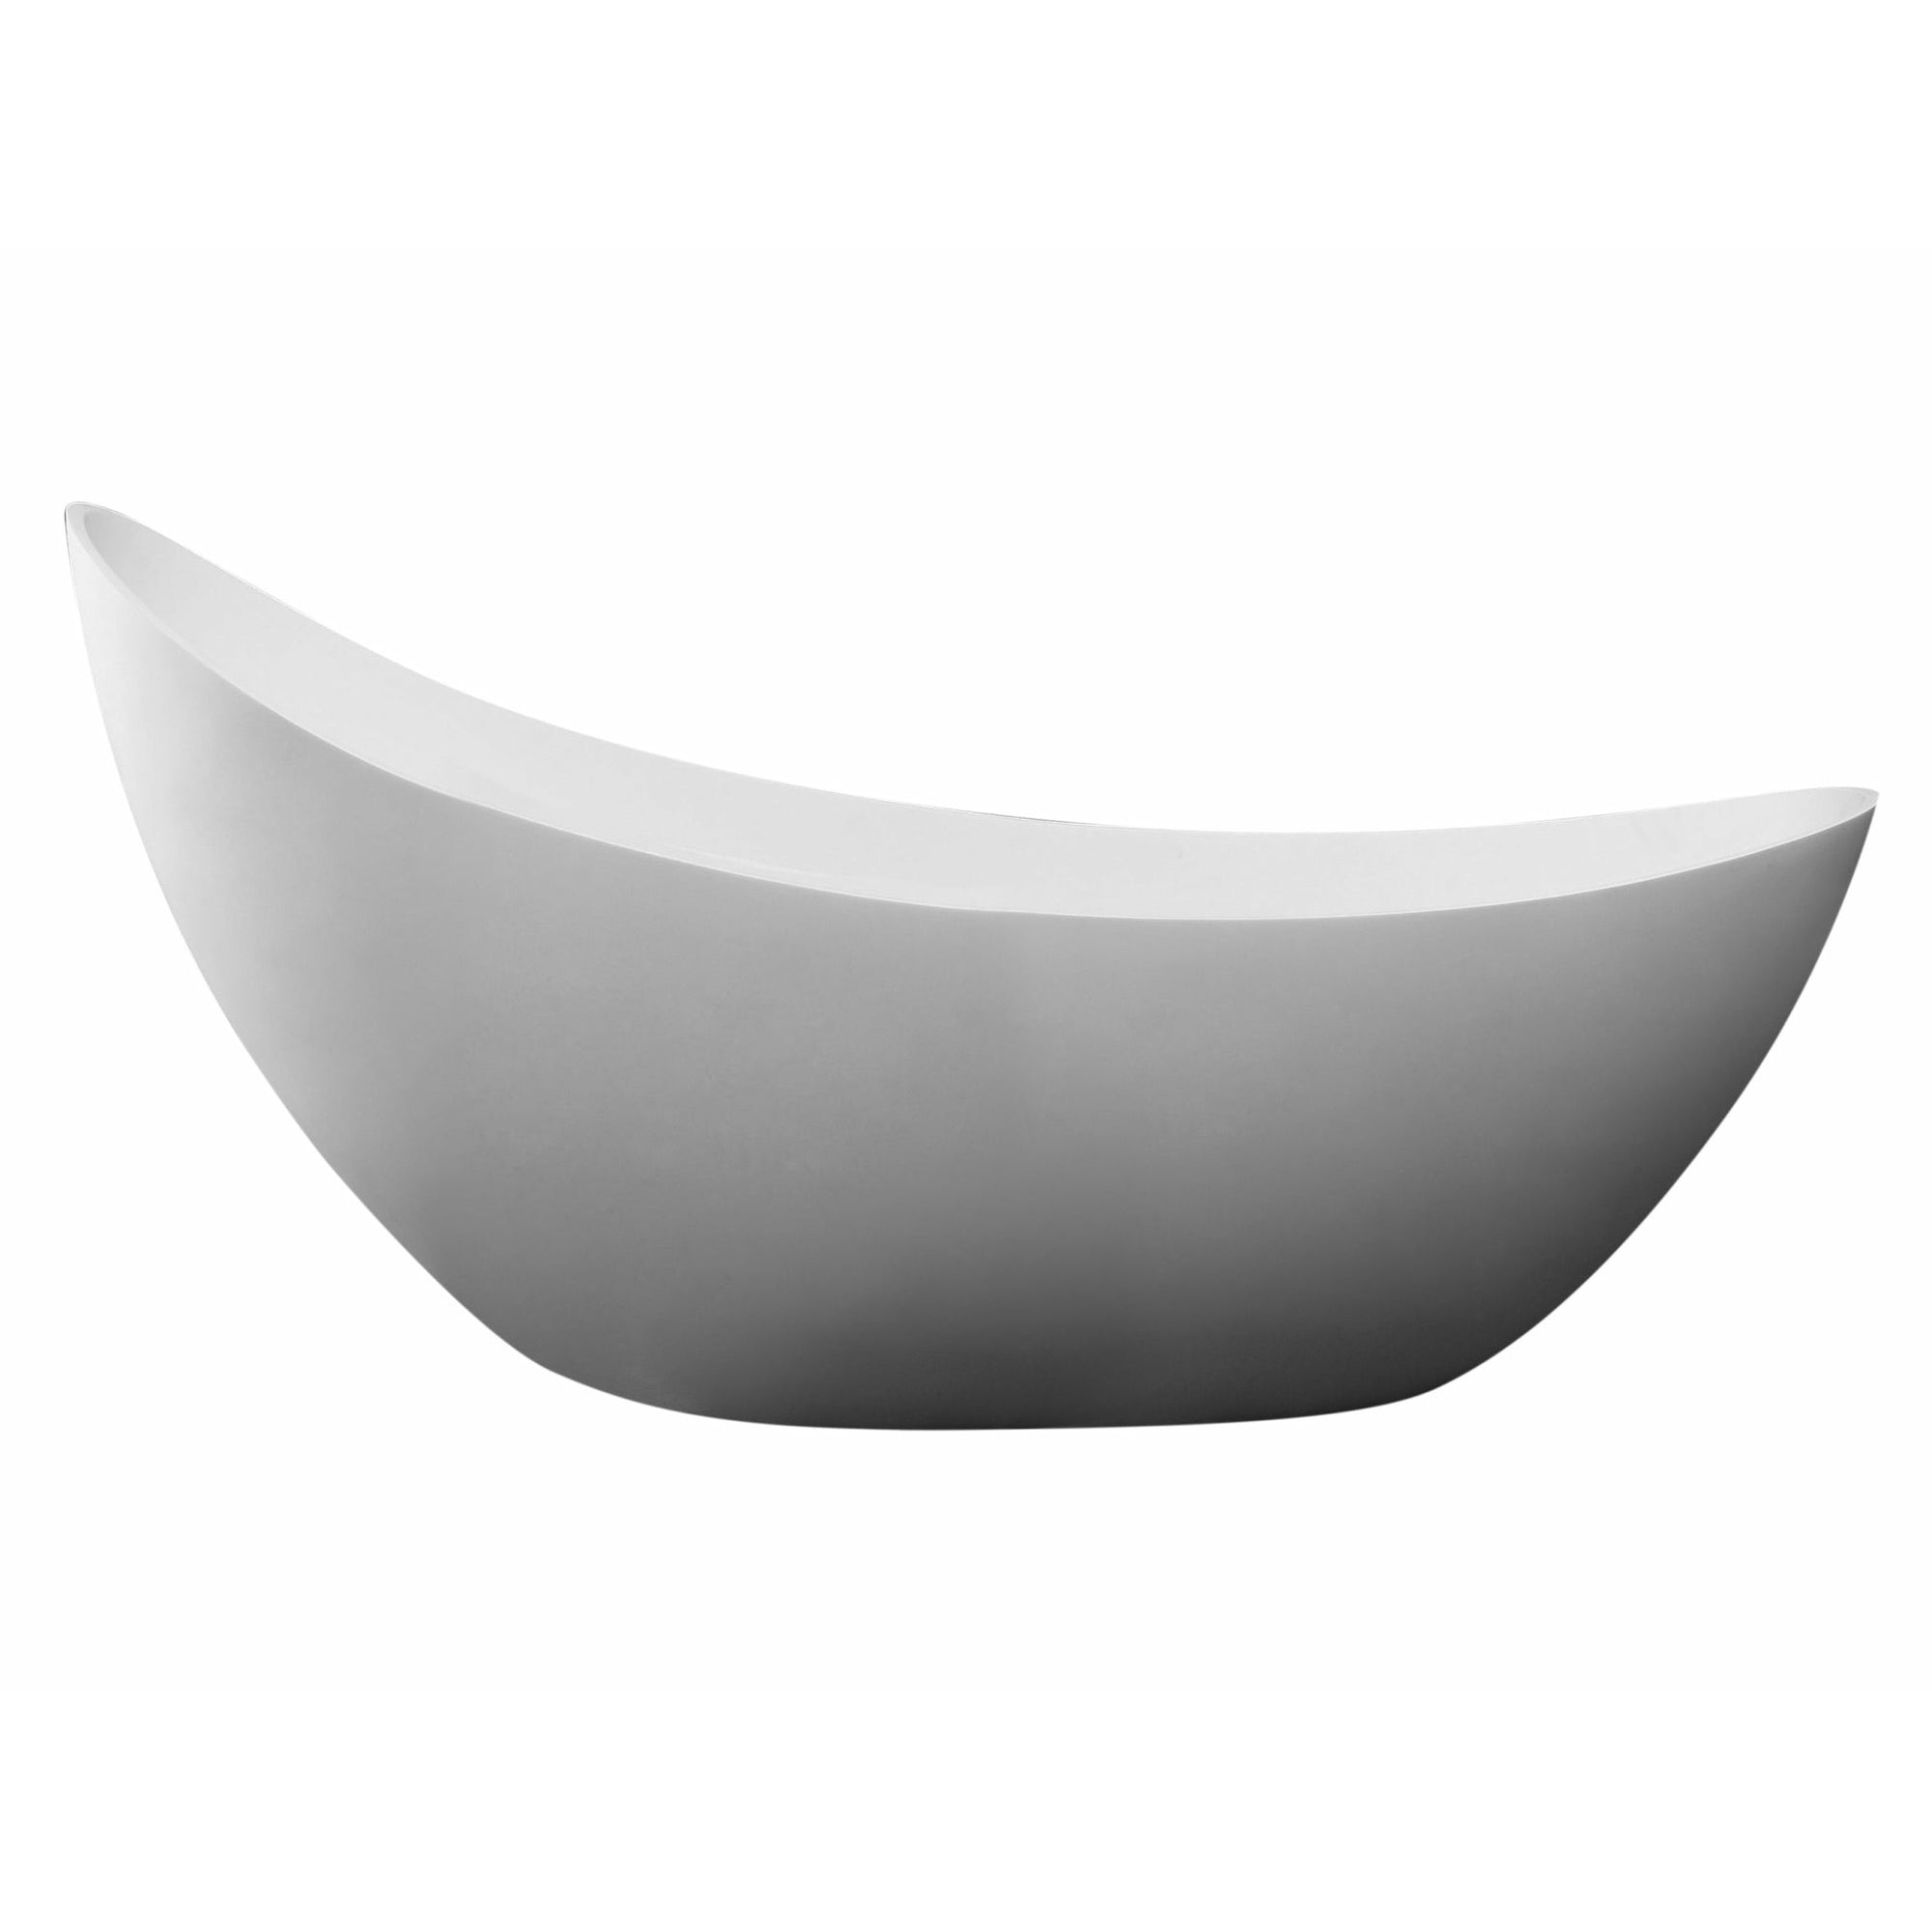 ALFI AB9951 73" White Solid Surface Smooth Resin Soaking Slipper Bathtub  with a matte finish in a white background